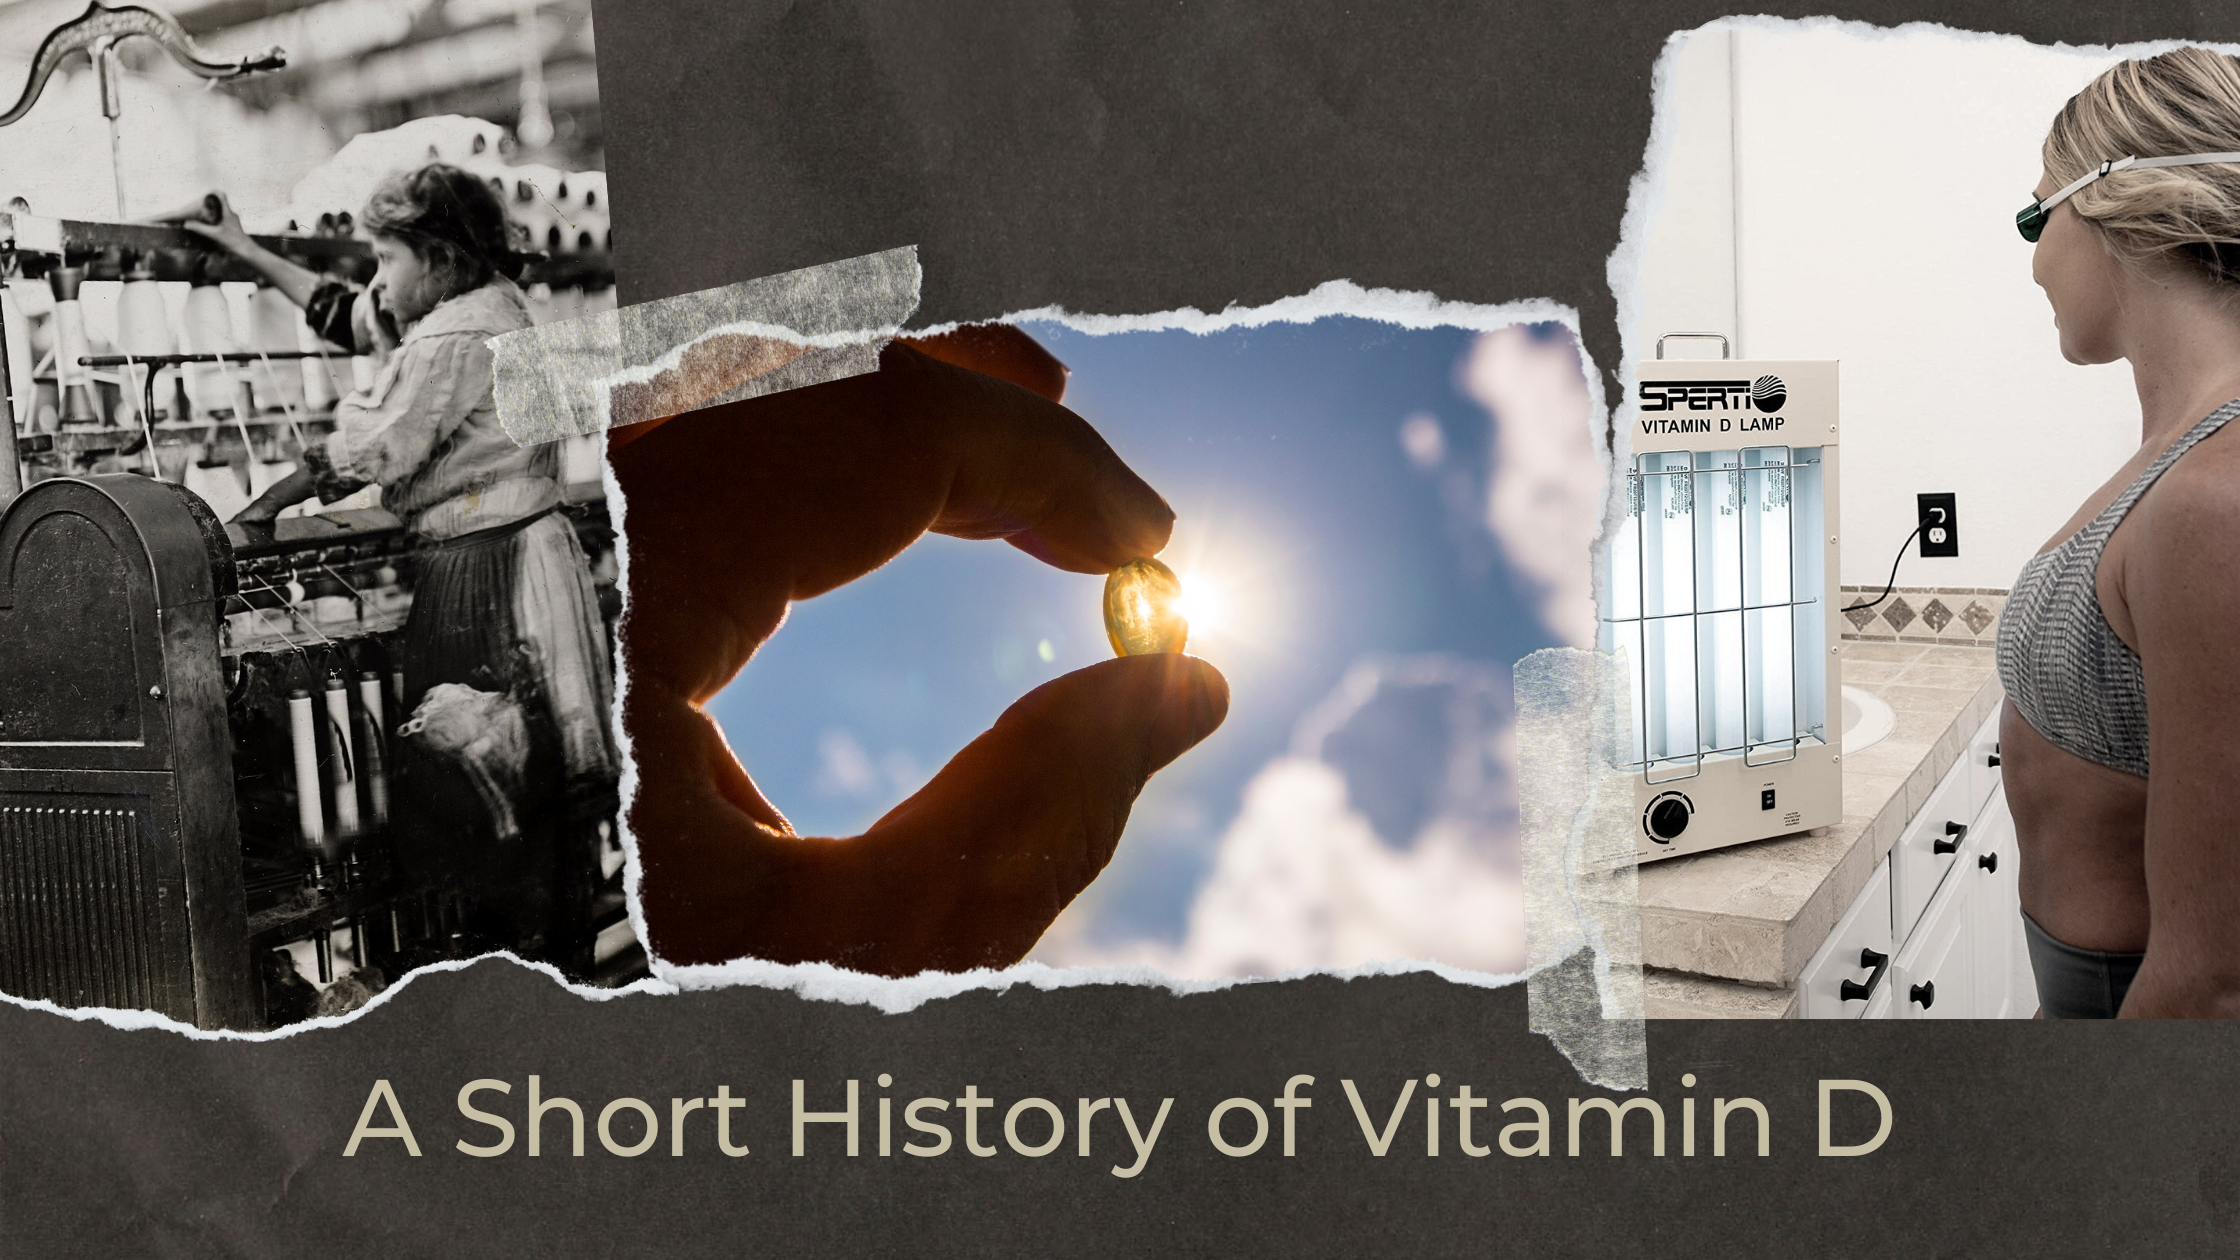 An image showing different images depicting a historical progression of vitamin d